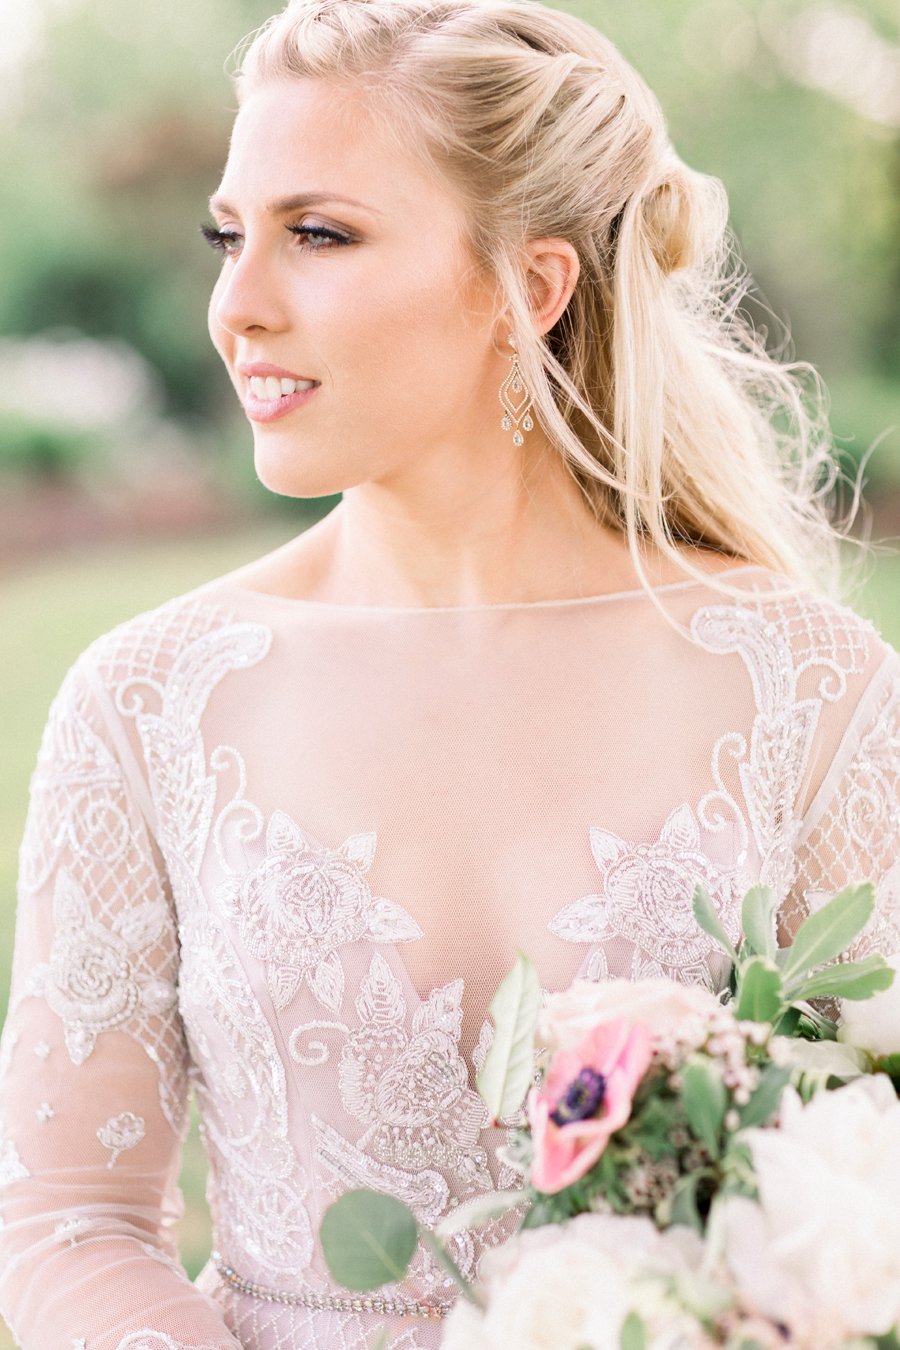 Bridal Portraits at a Blue Bell Farm wedding captures by photographer Love Tree Studios.